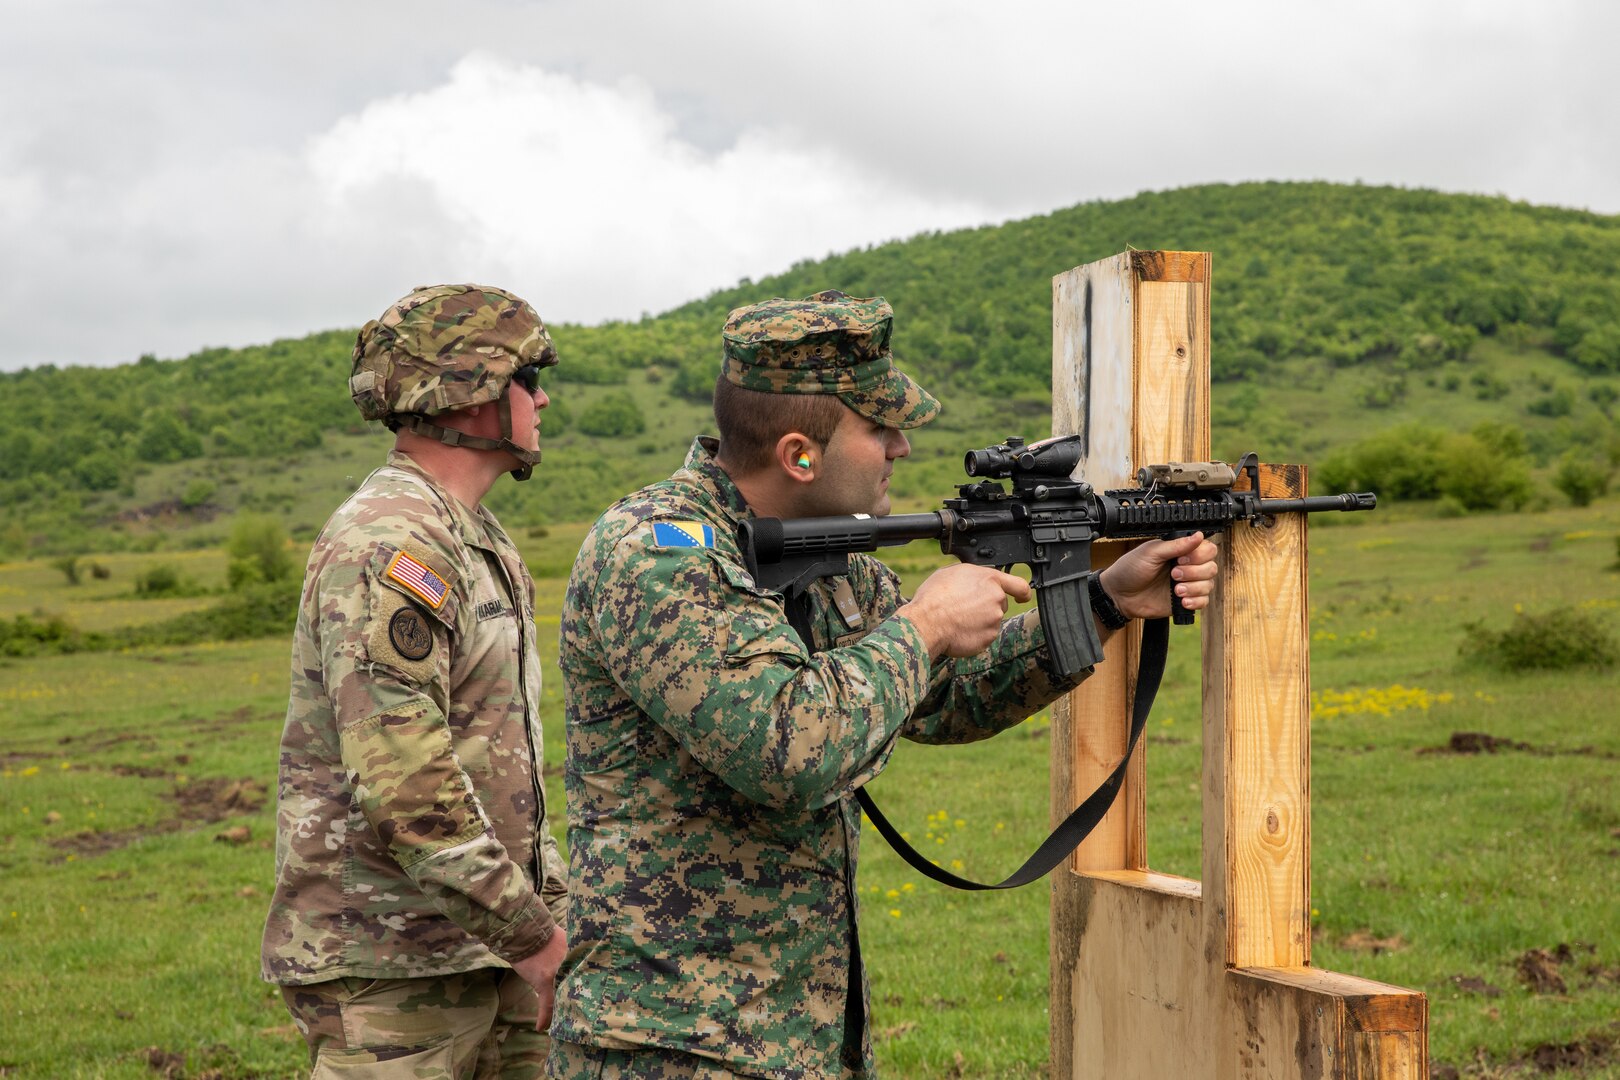 U.S. Army Staff Sgt. Justin Sachariason, left, a Soldier assigned to the Florida Army National Guard's 2nd Battalion, 124th Infantry Regiment, 53rd Infantry Brigade Combat Team, instructs 1st Lt. Almir Sarac, a soldier with the Armed Forces of Bosnia and Herzegovina, how to shoot the M4A1 carbine rifle at Manjaca Training Area, Bosnia and Herzegovina, May 19, 2021.